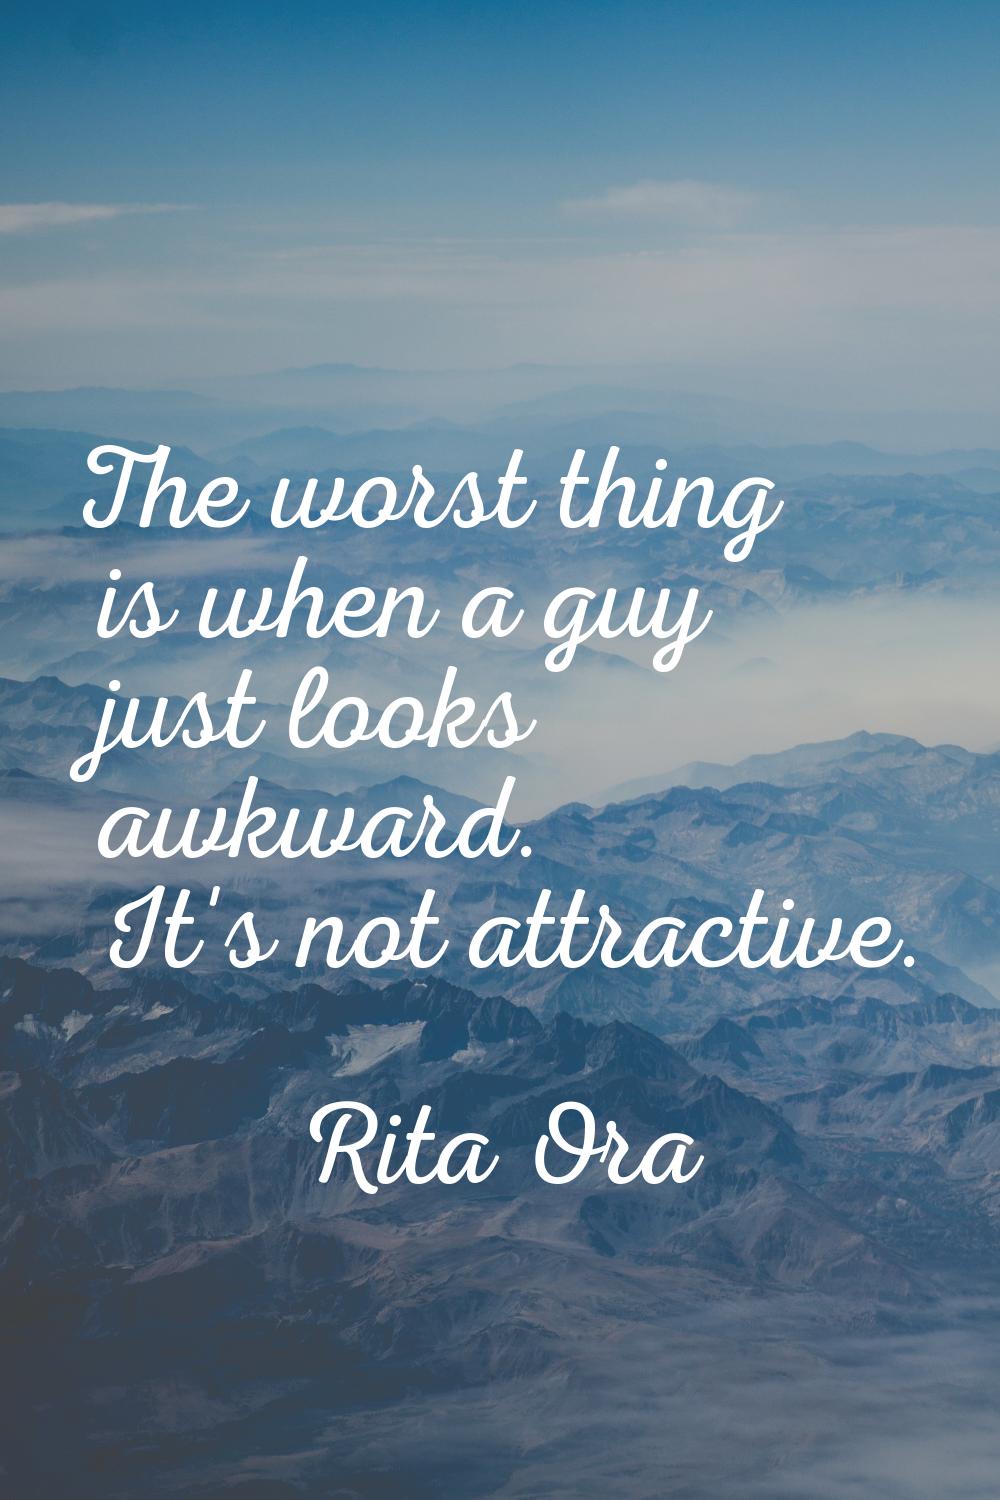 The worst thing is when a guy just looks awkward. It's not attractive.